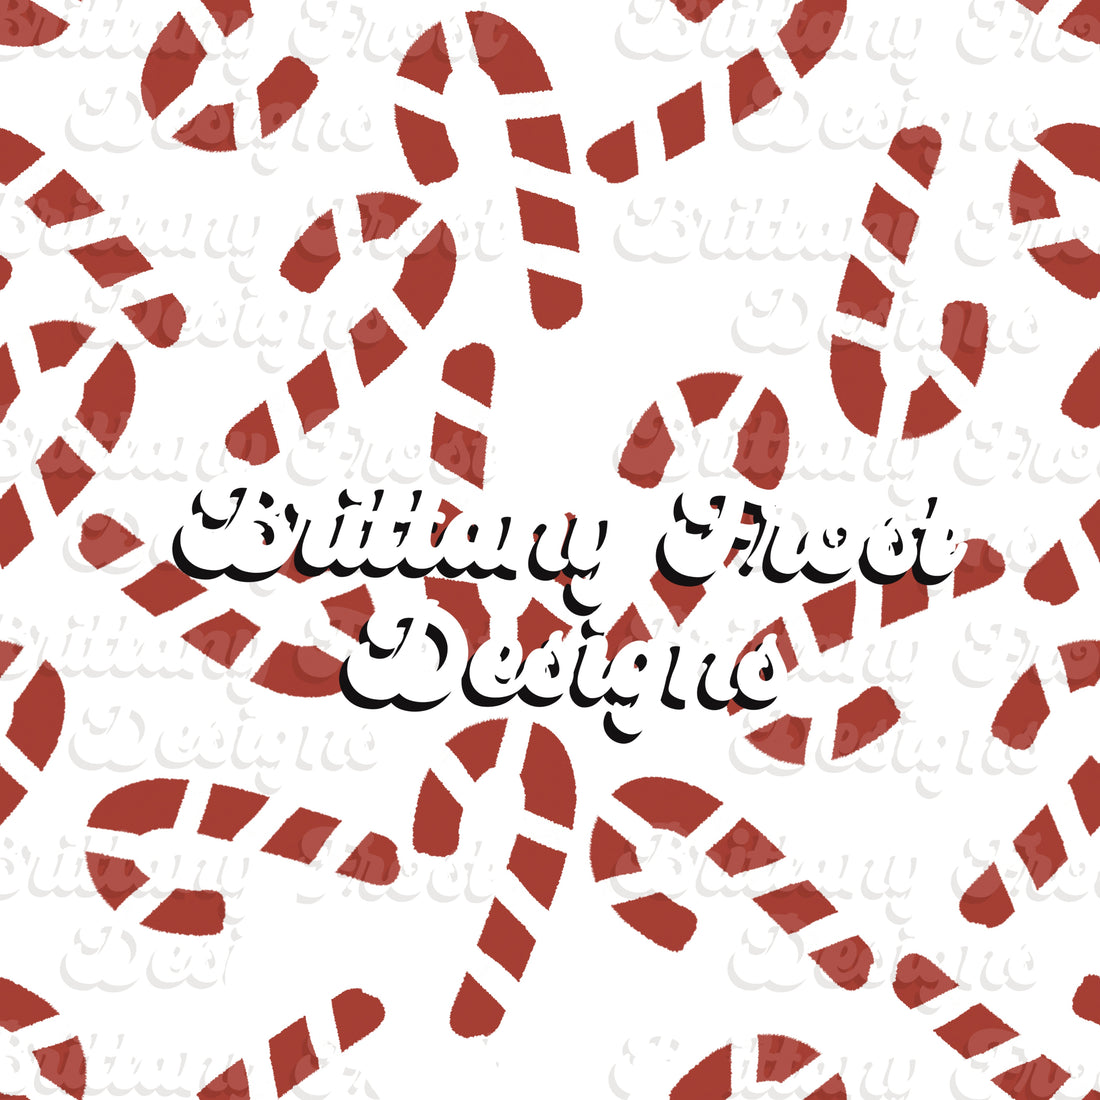 Candy Canes Seamless File